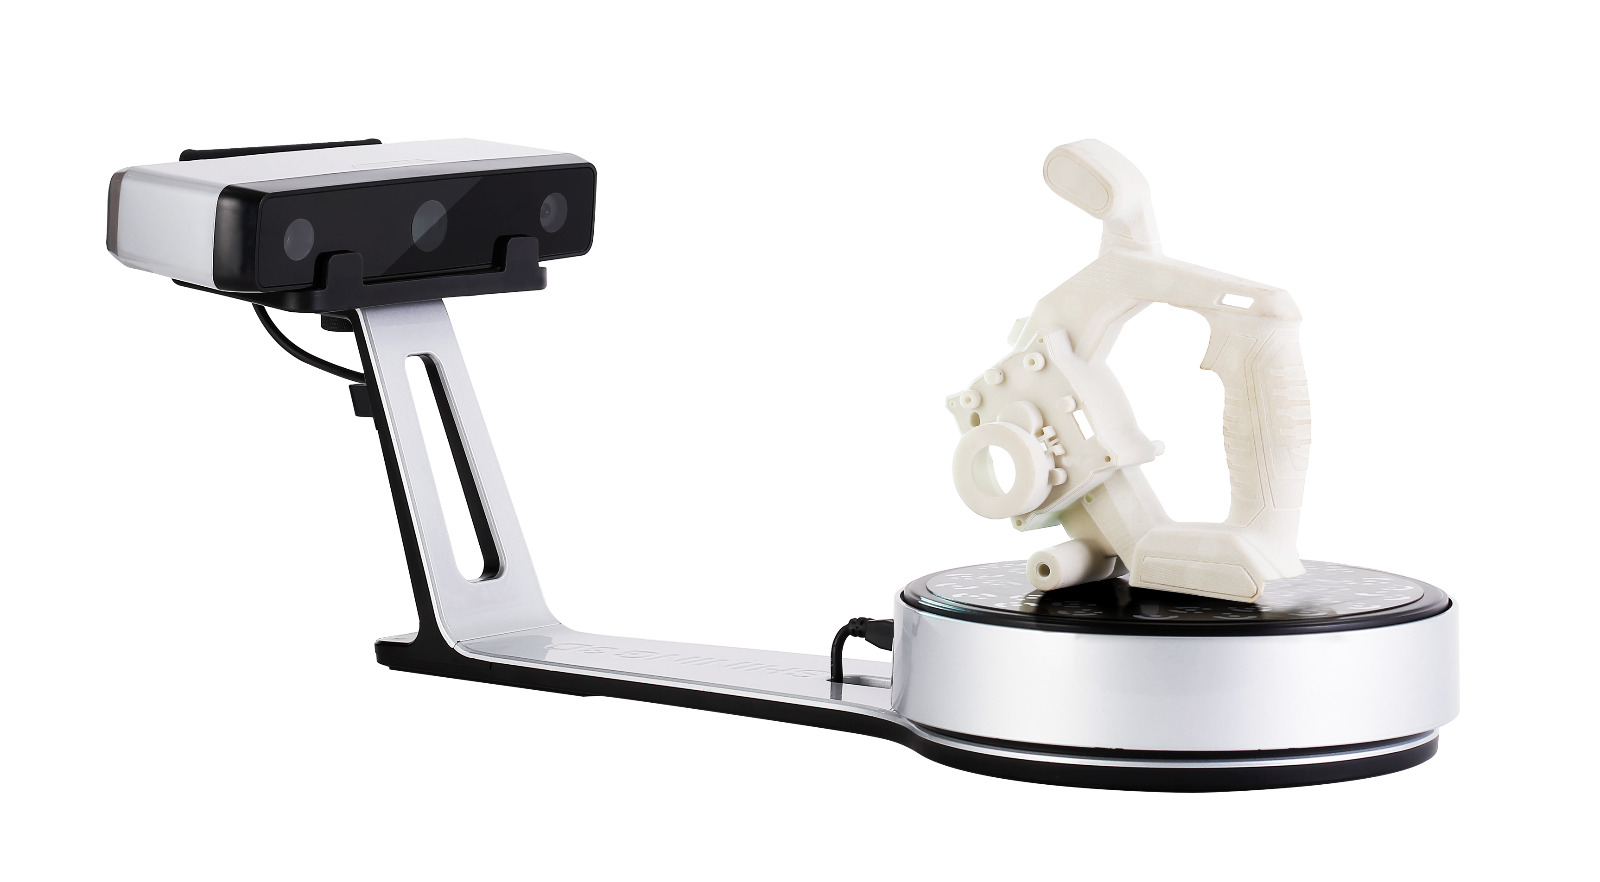 NEW Shining 3D einscan-SP 3D scanner incl. Turntable